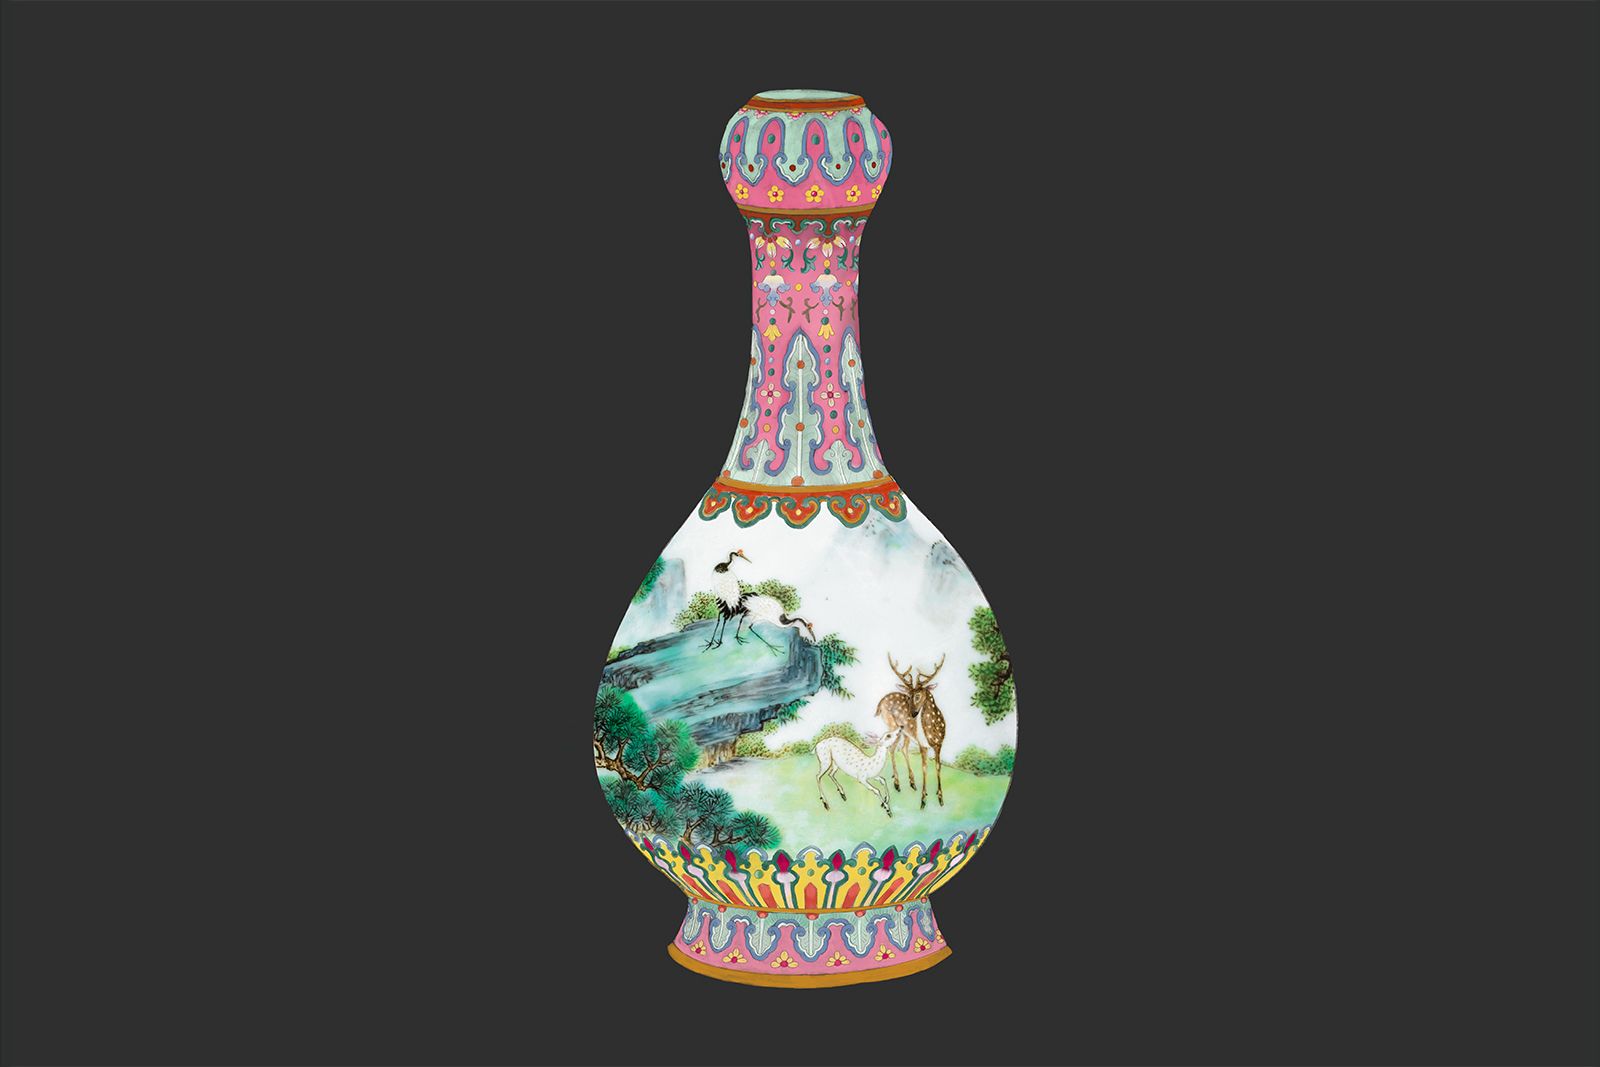 The Qing Dynasty Yangcai porcelain vase that inspired the new Paradise in Harmony line by Simone Jewels 